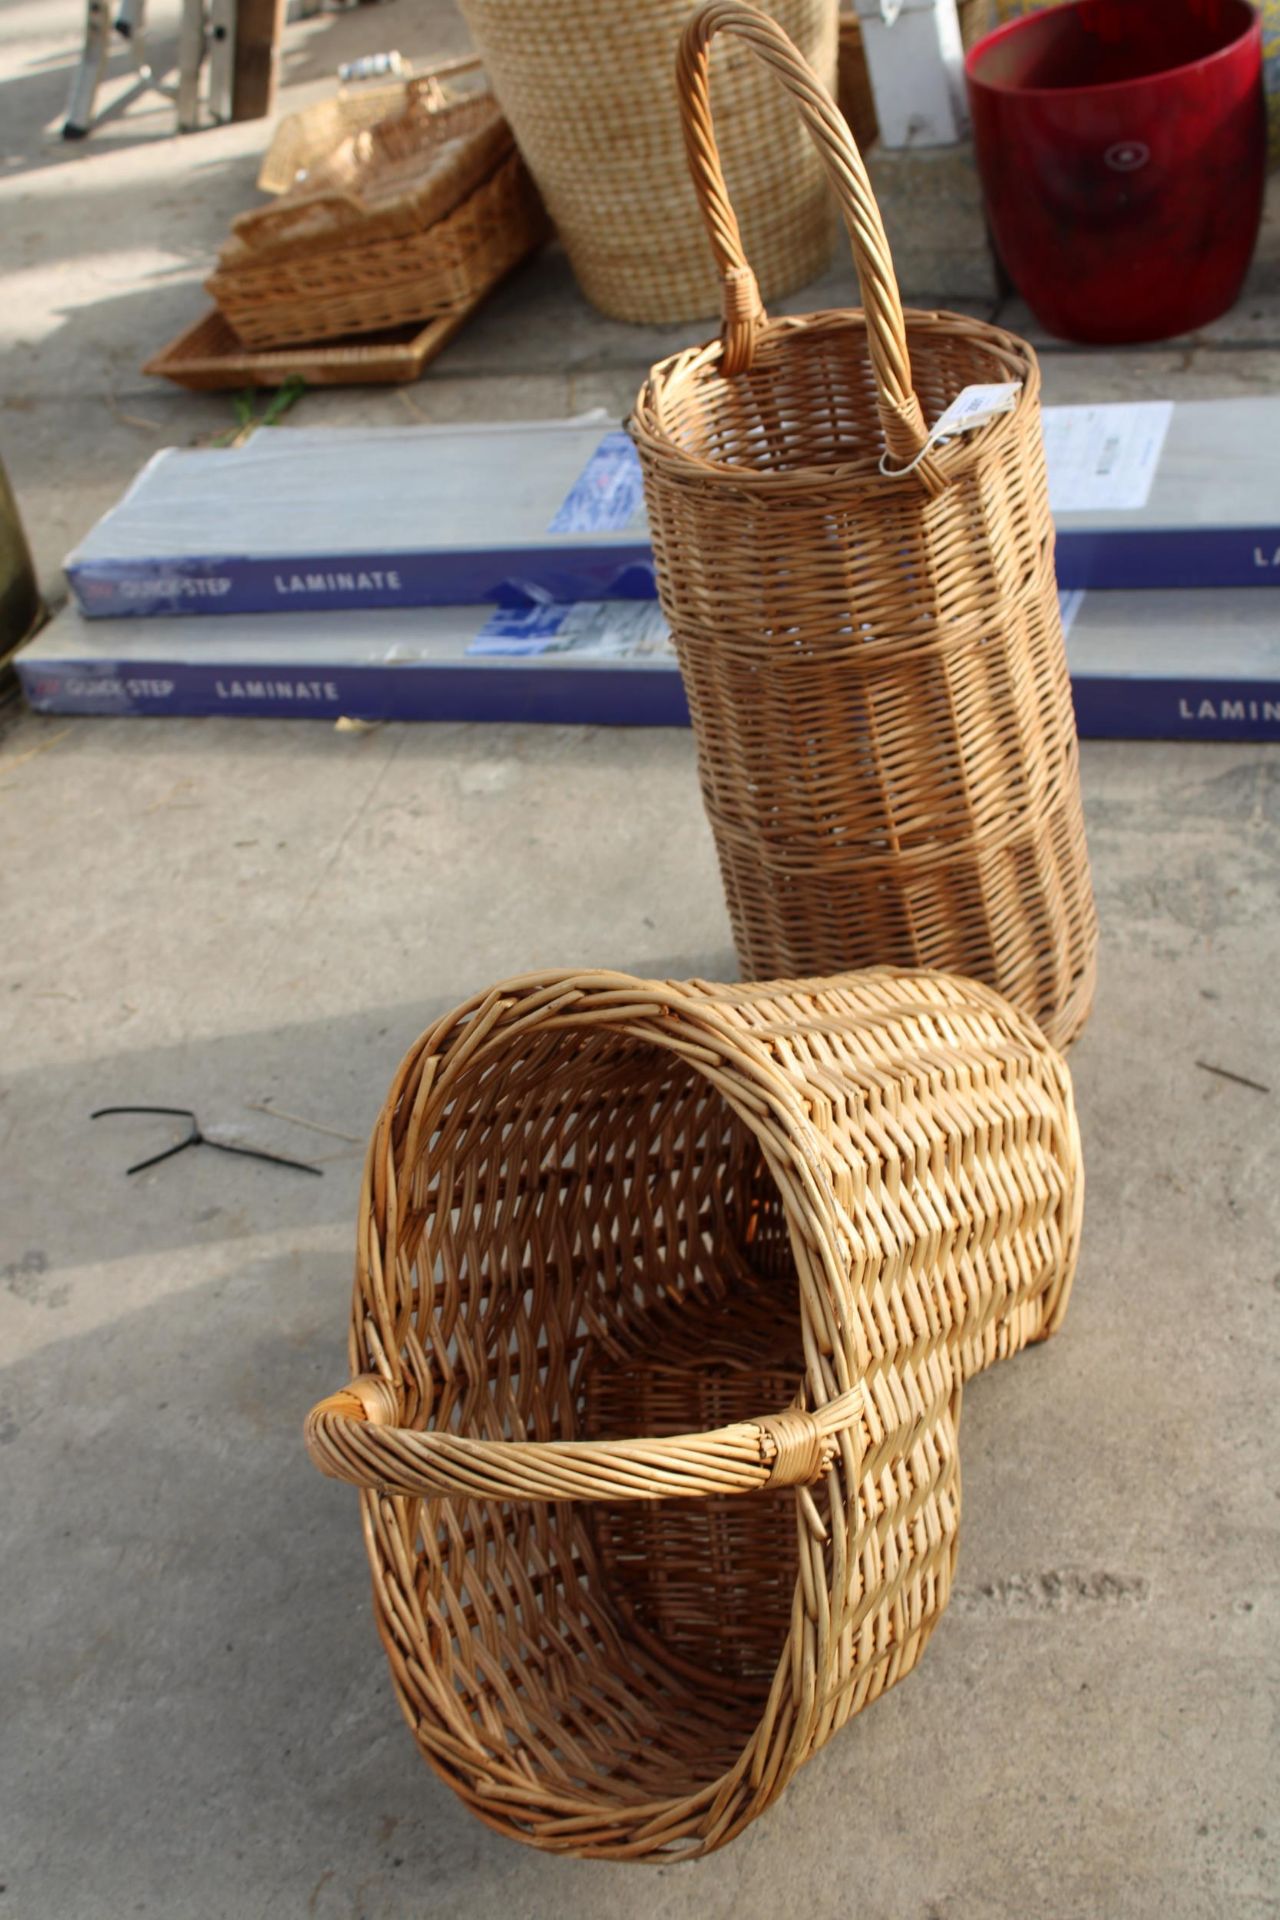 A TALL WICKER BASKET AND A STEPPED WICKER BASKET - Image 2 of 2